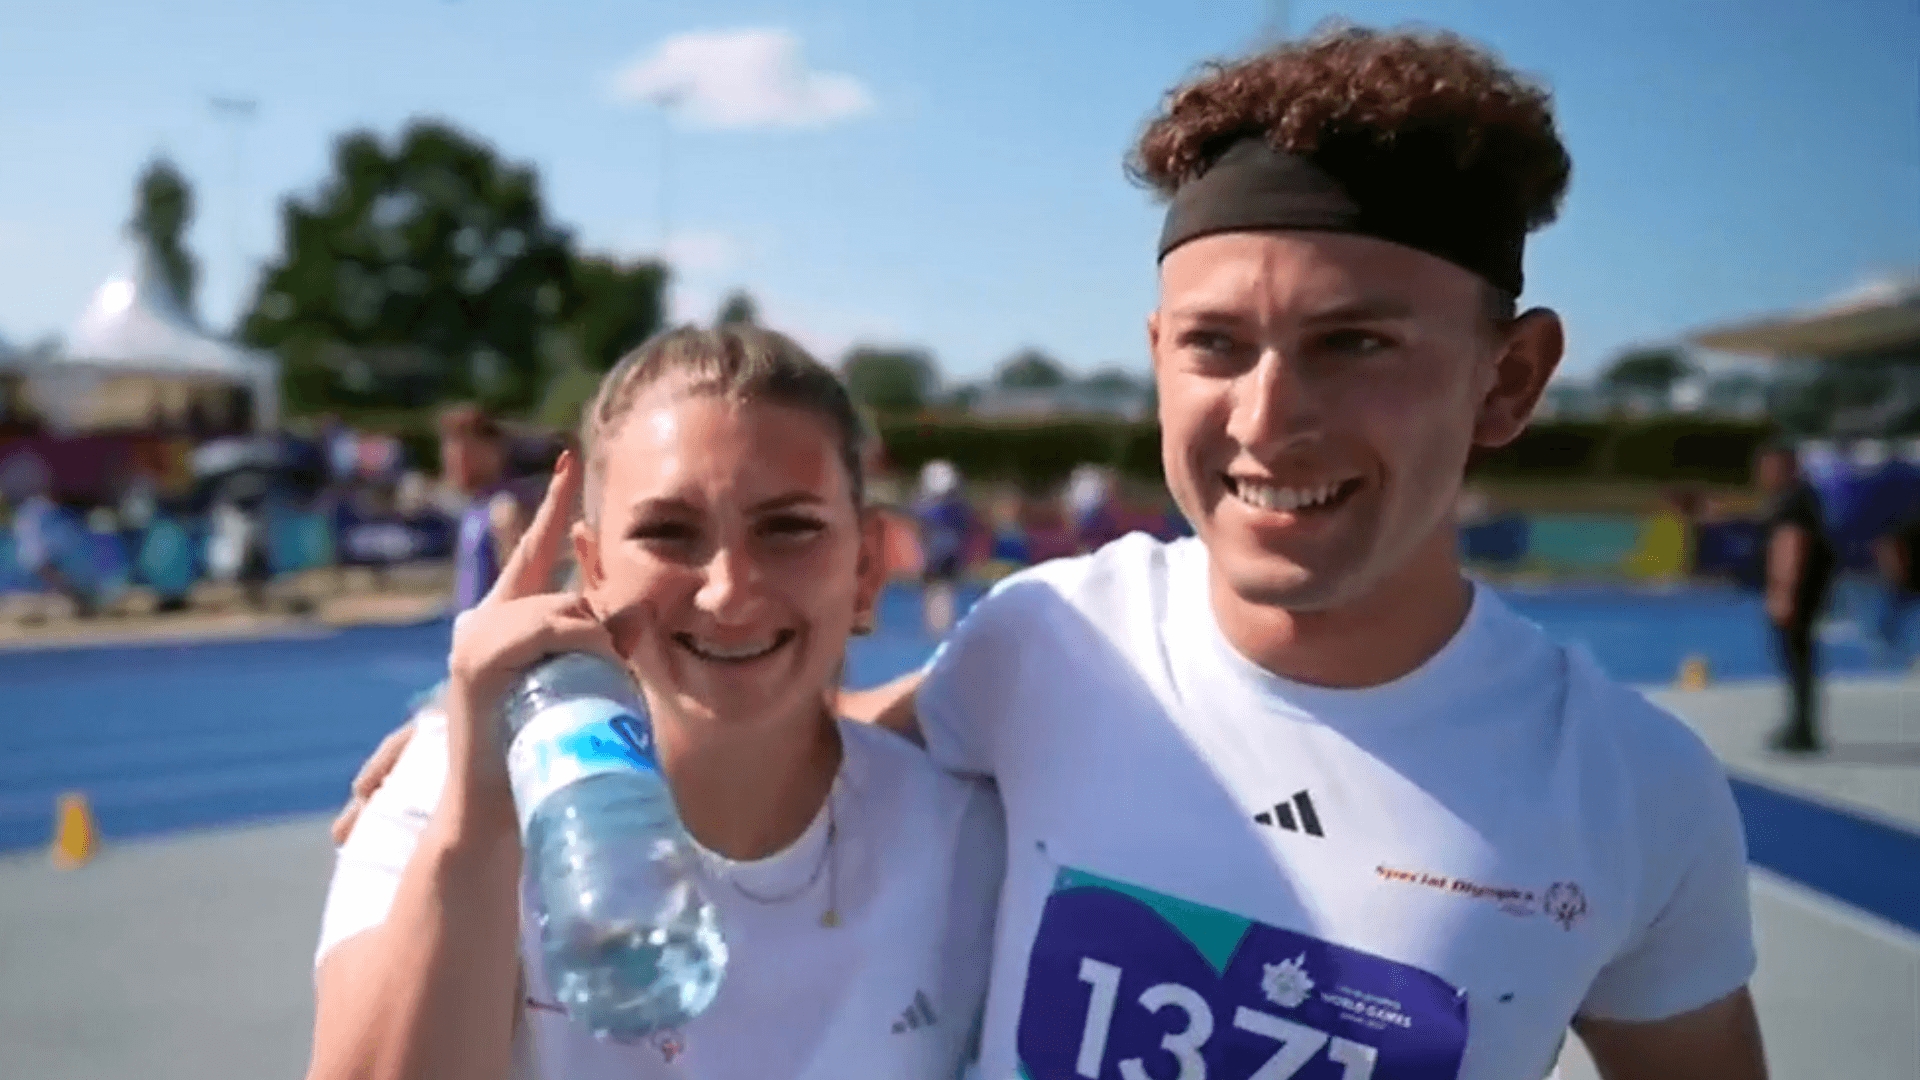 Siblings win gold for Malta in another 4x100m final